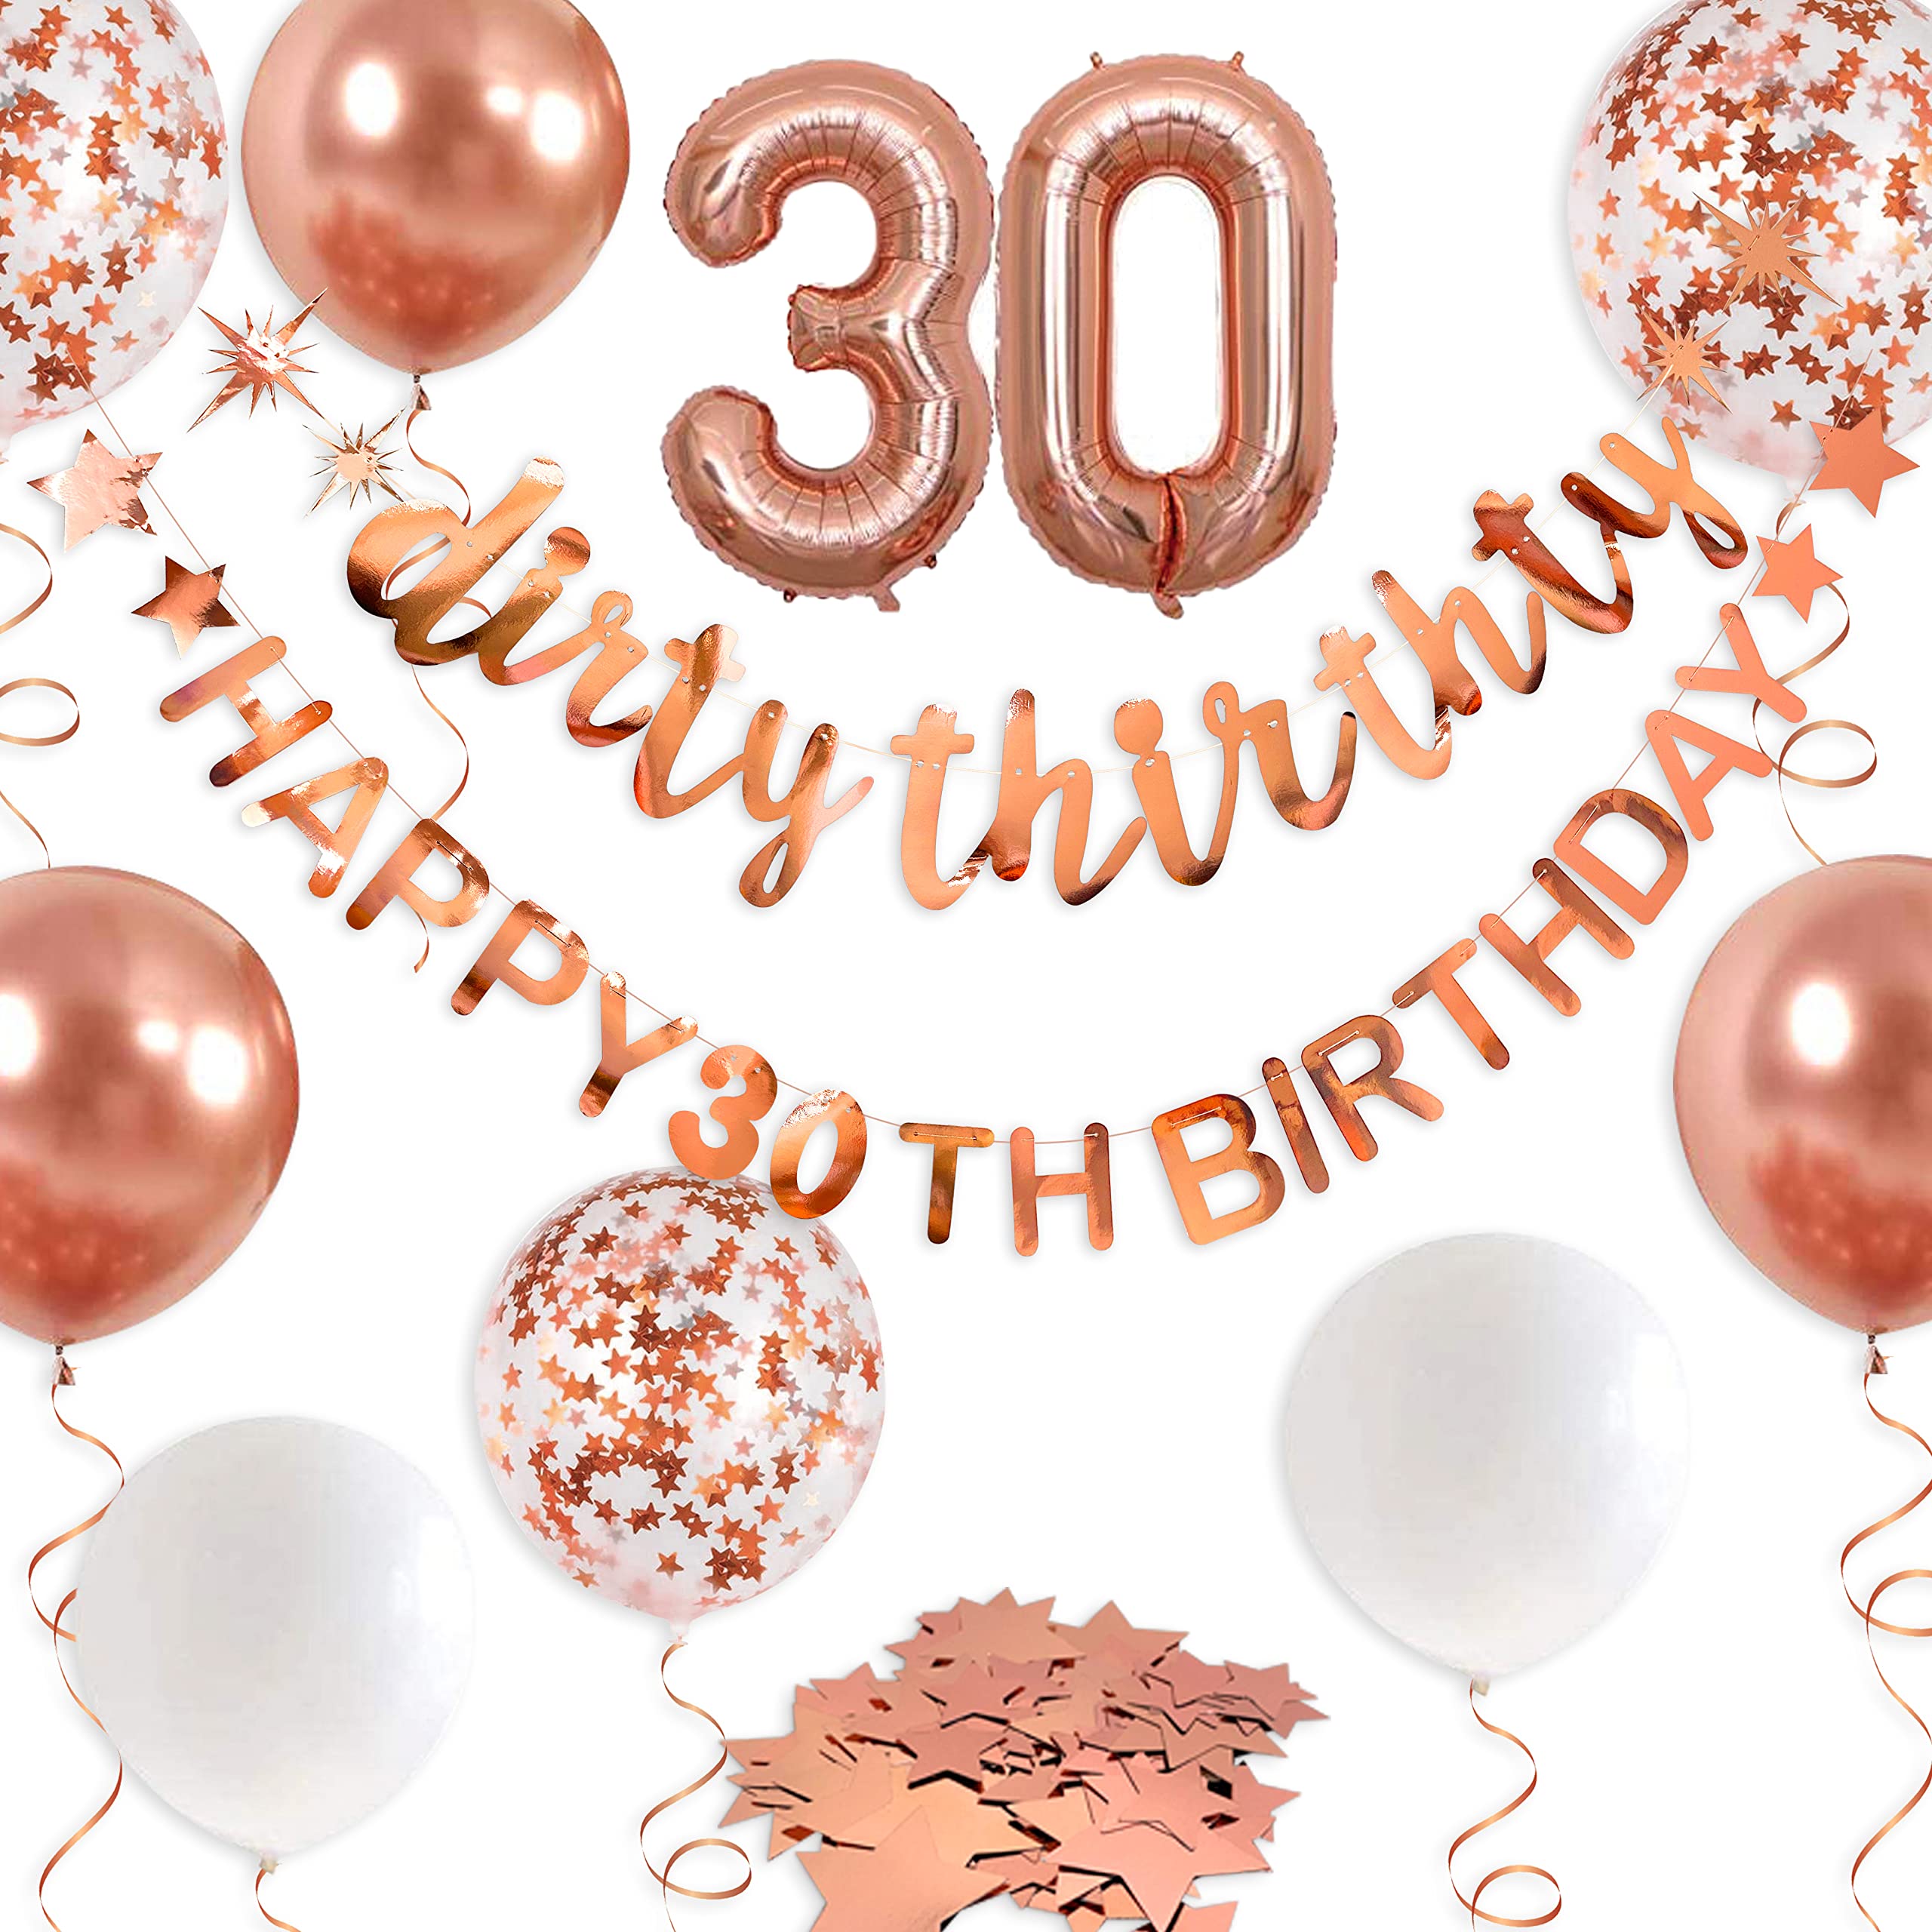 30th birthday banners for her